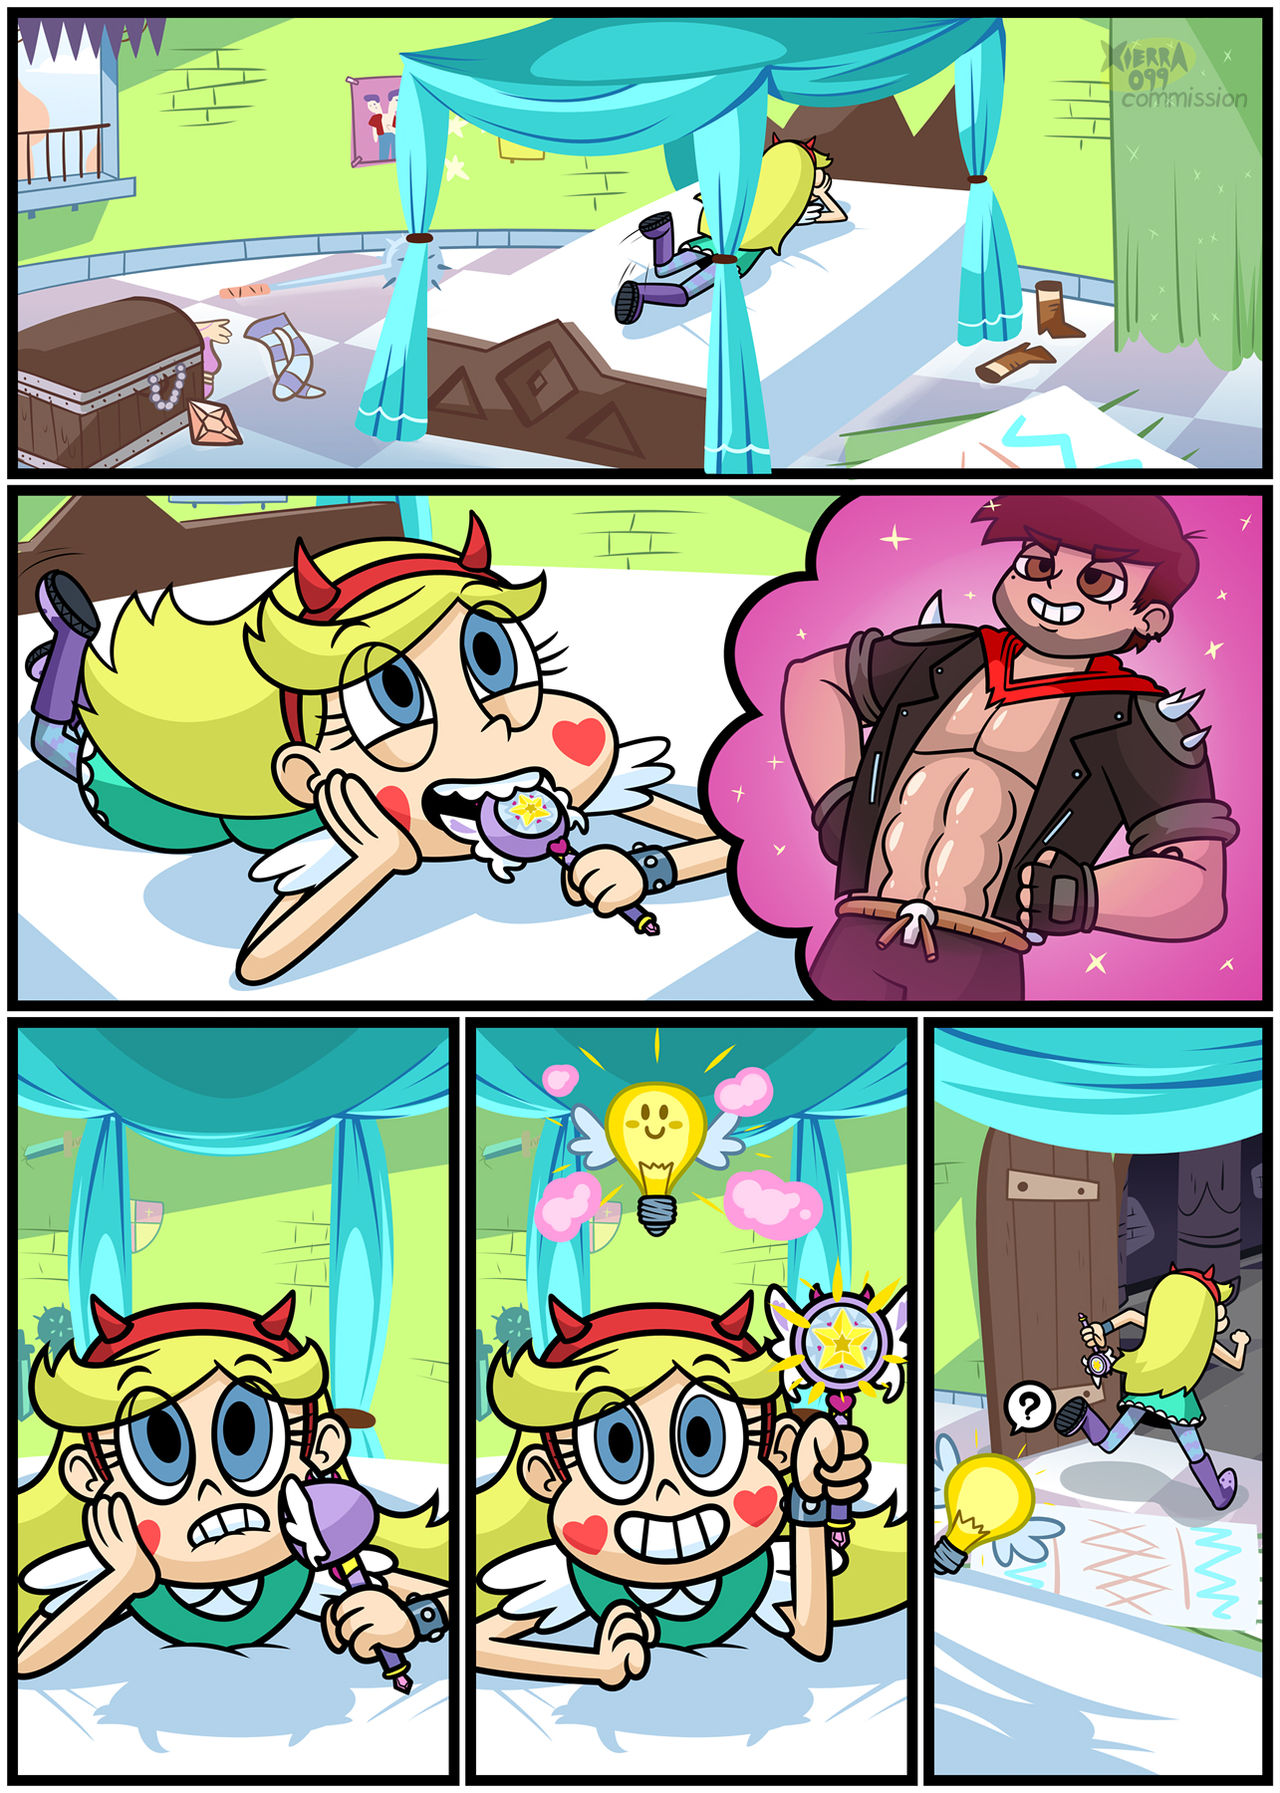 1280px x 1793px - Future With Benefits (Star Vs the Forces of Evil ...